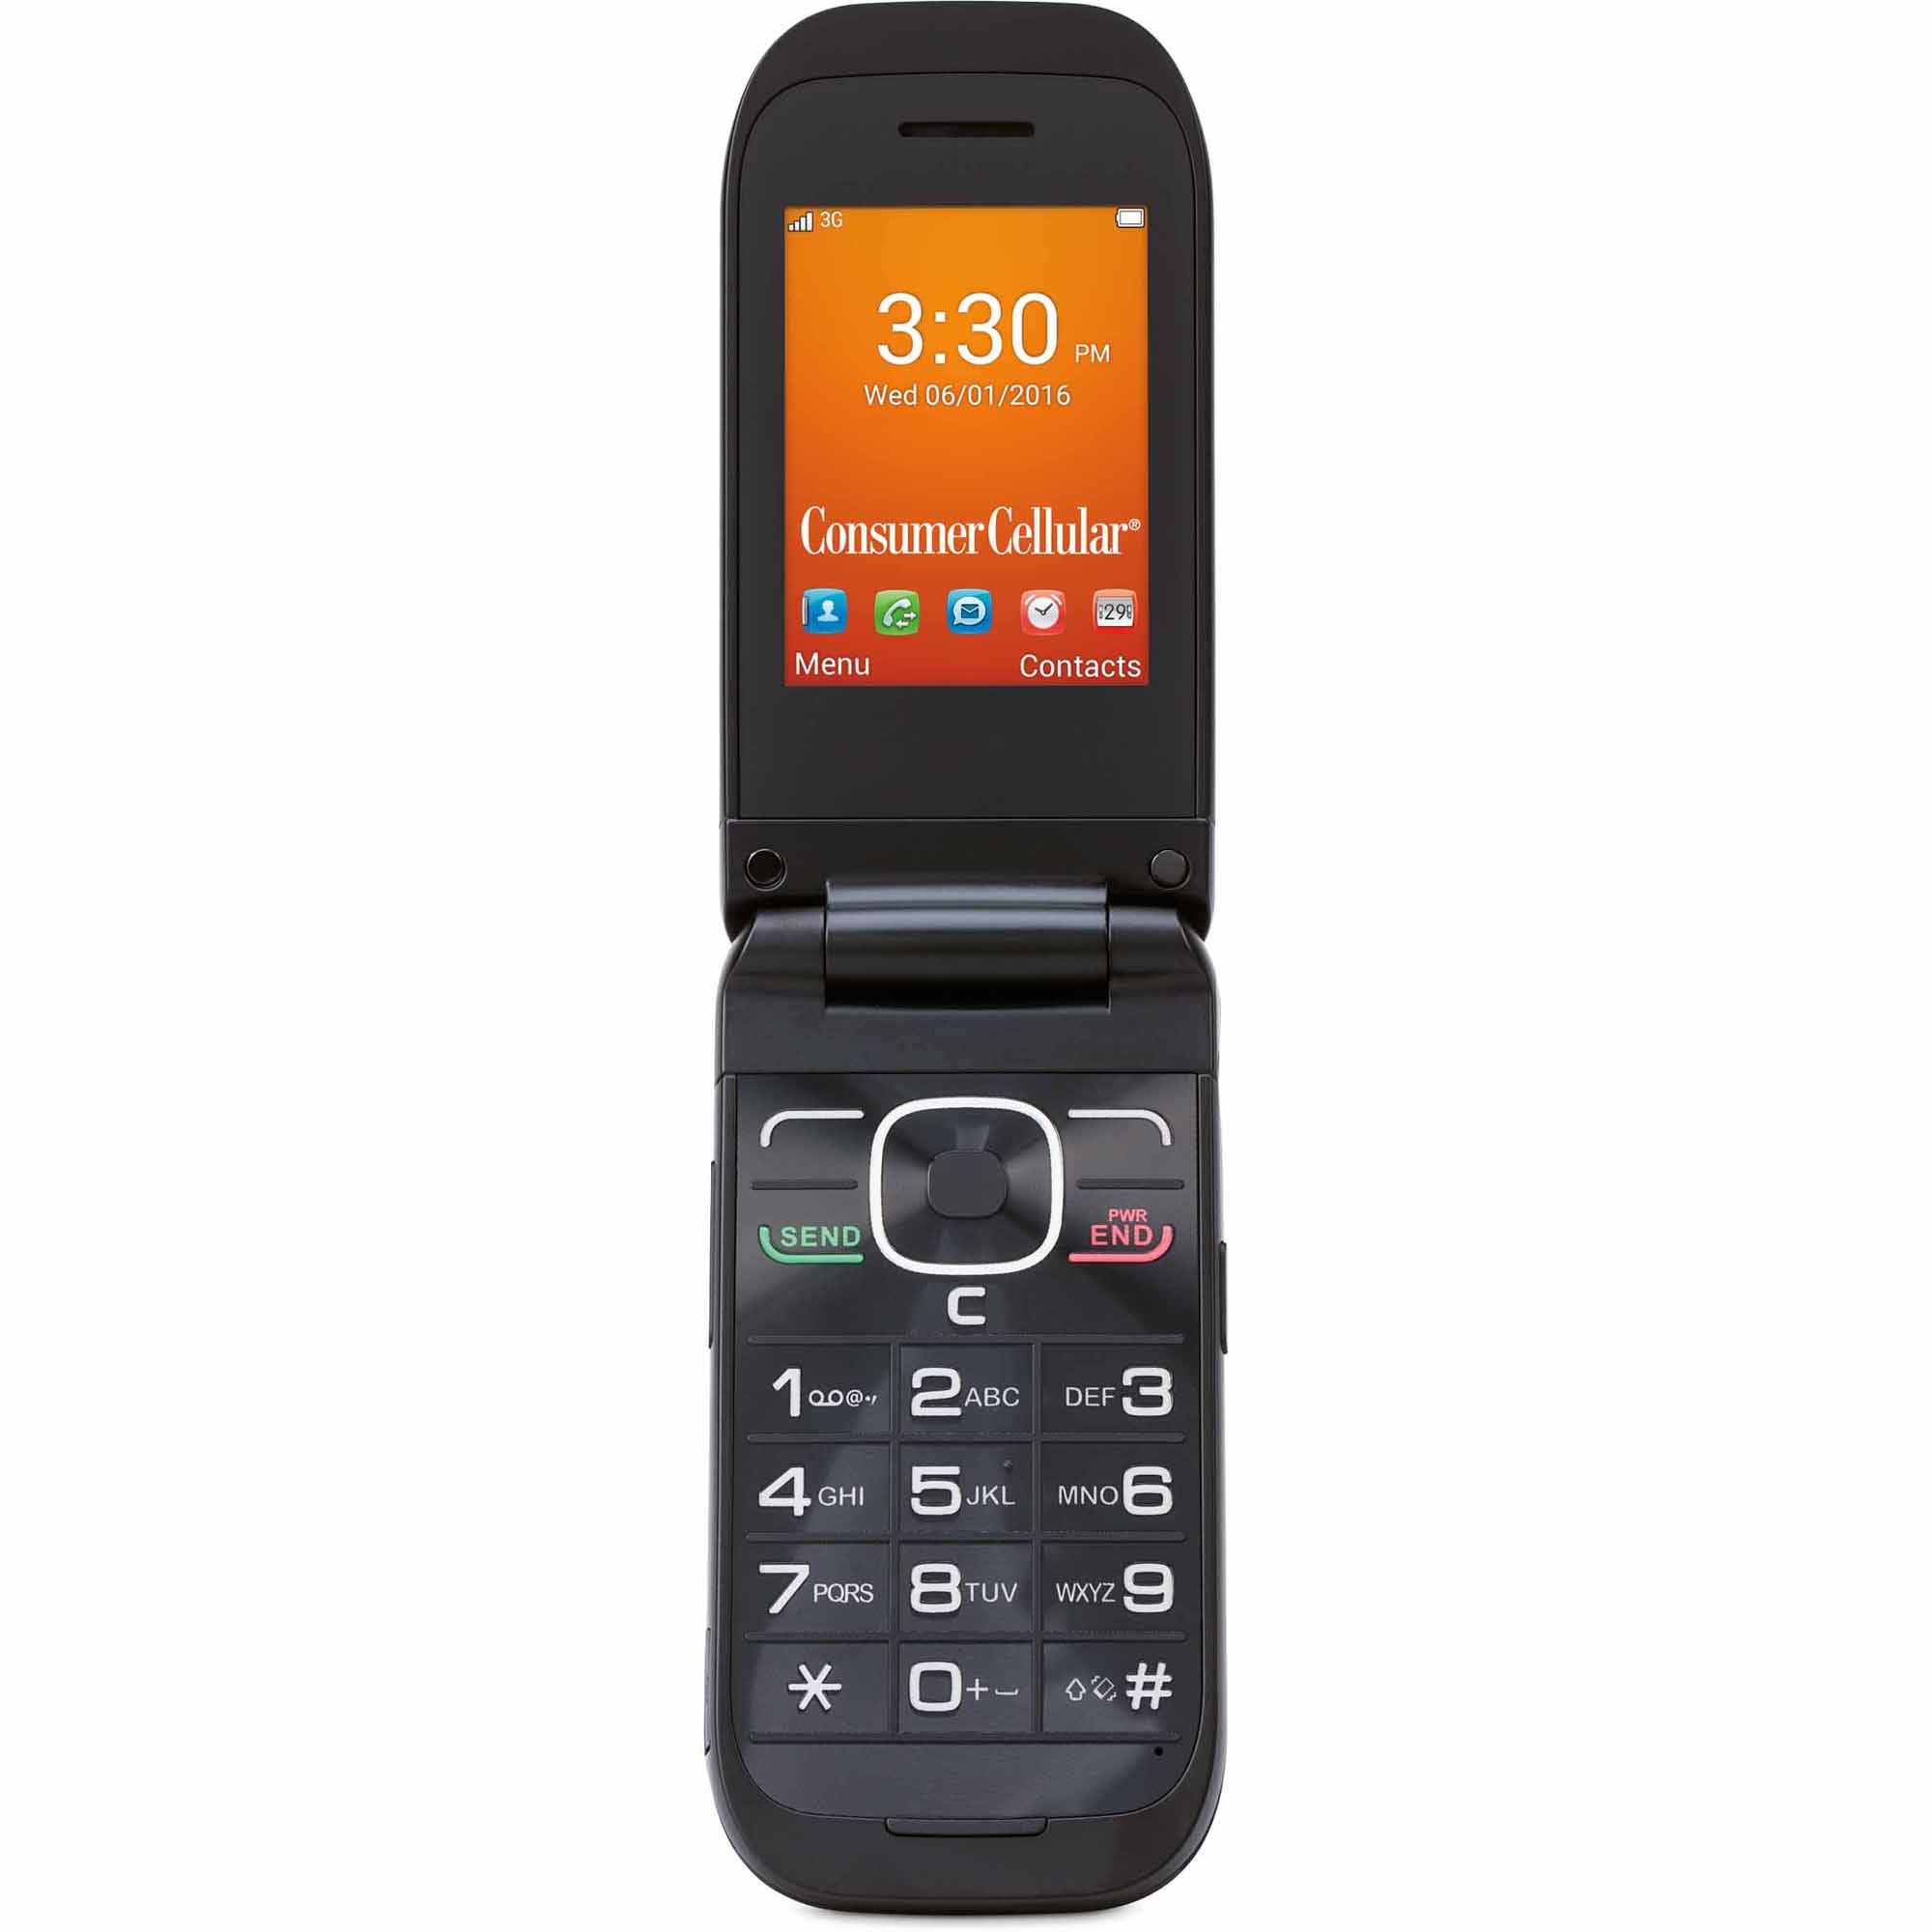 CONSUMER CELLULAR CELL PHONES CAN BE USED WITH WHICH PROVIDERS